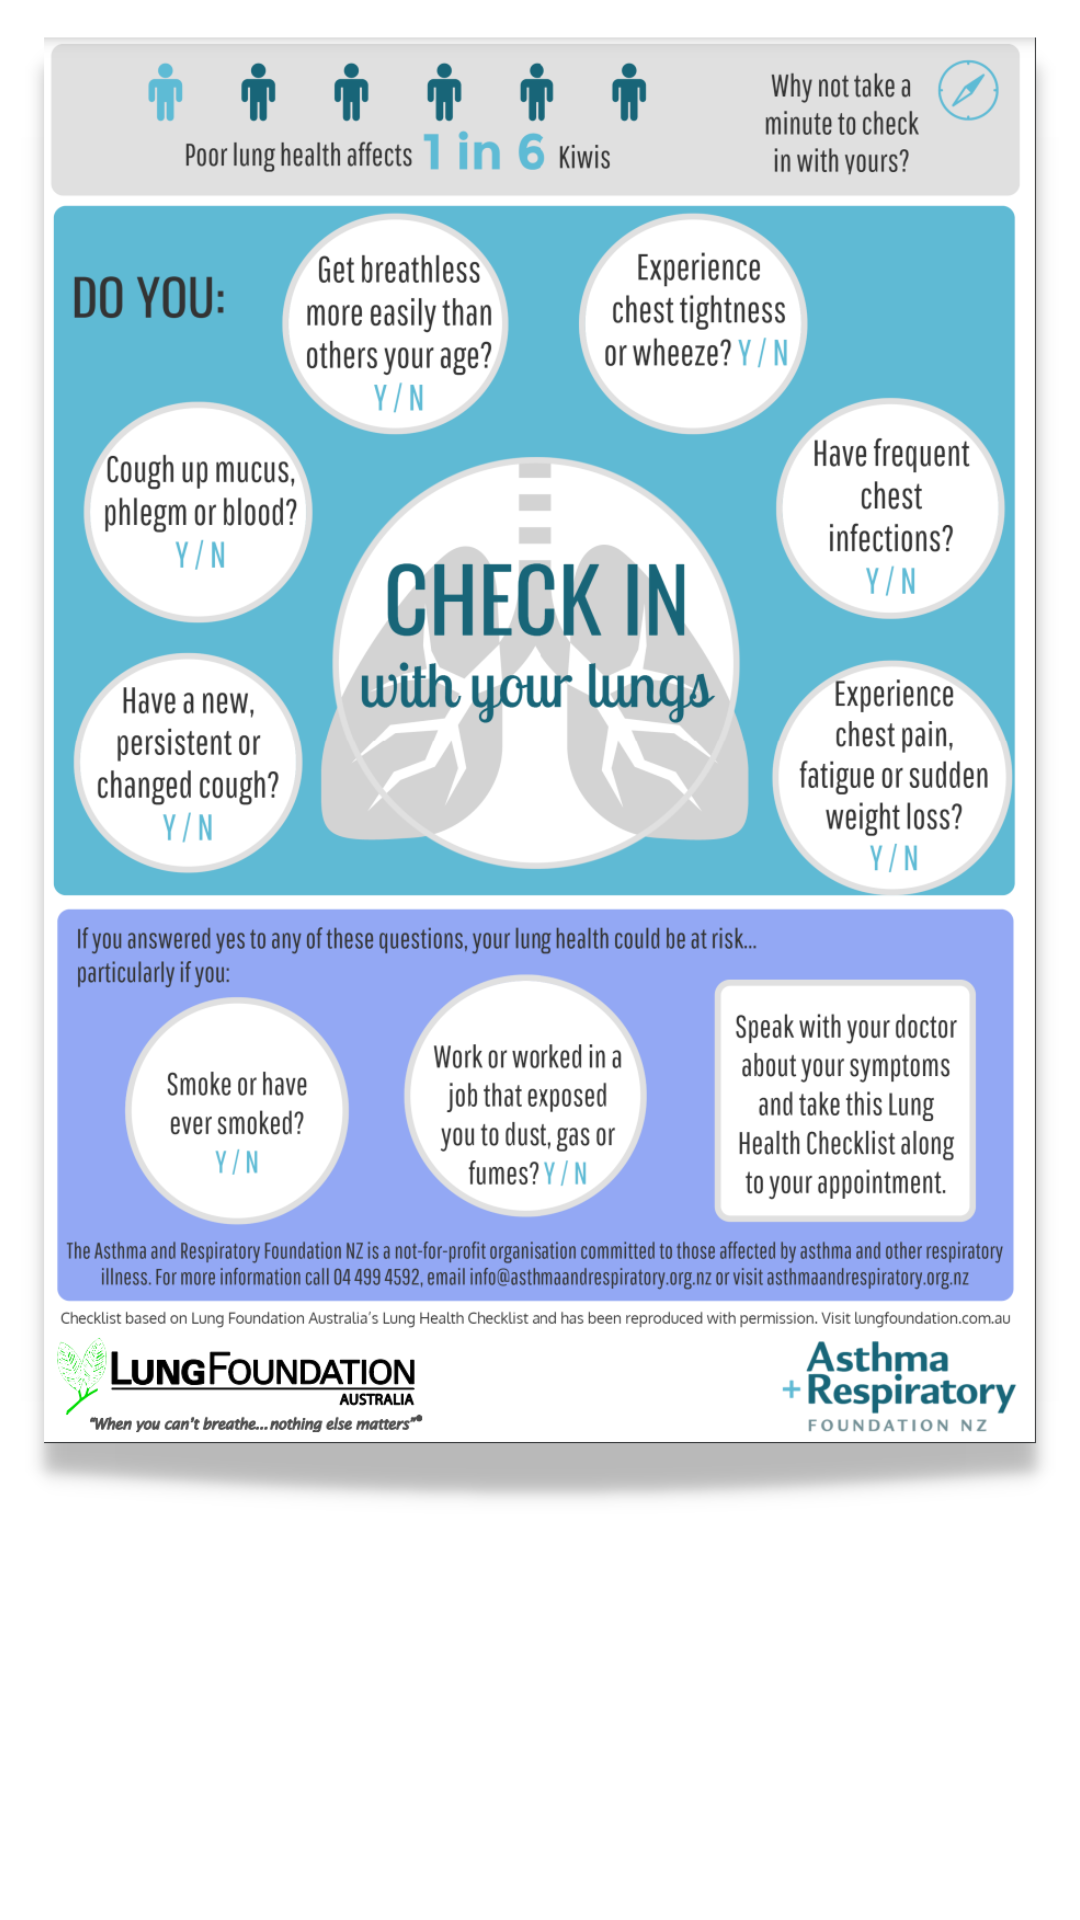 Check in with your lungs